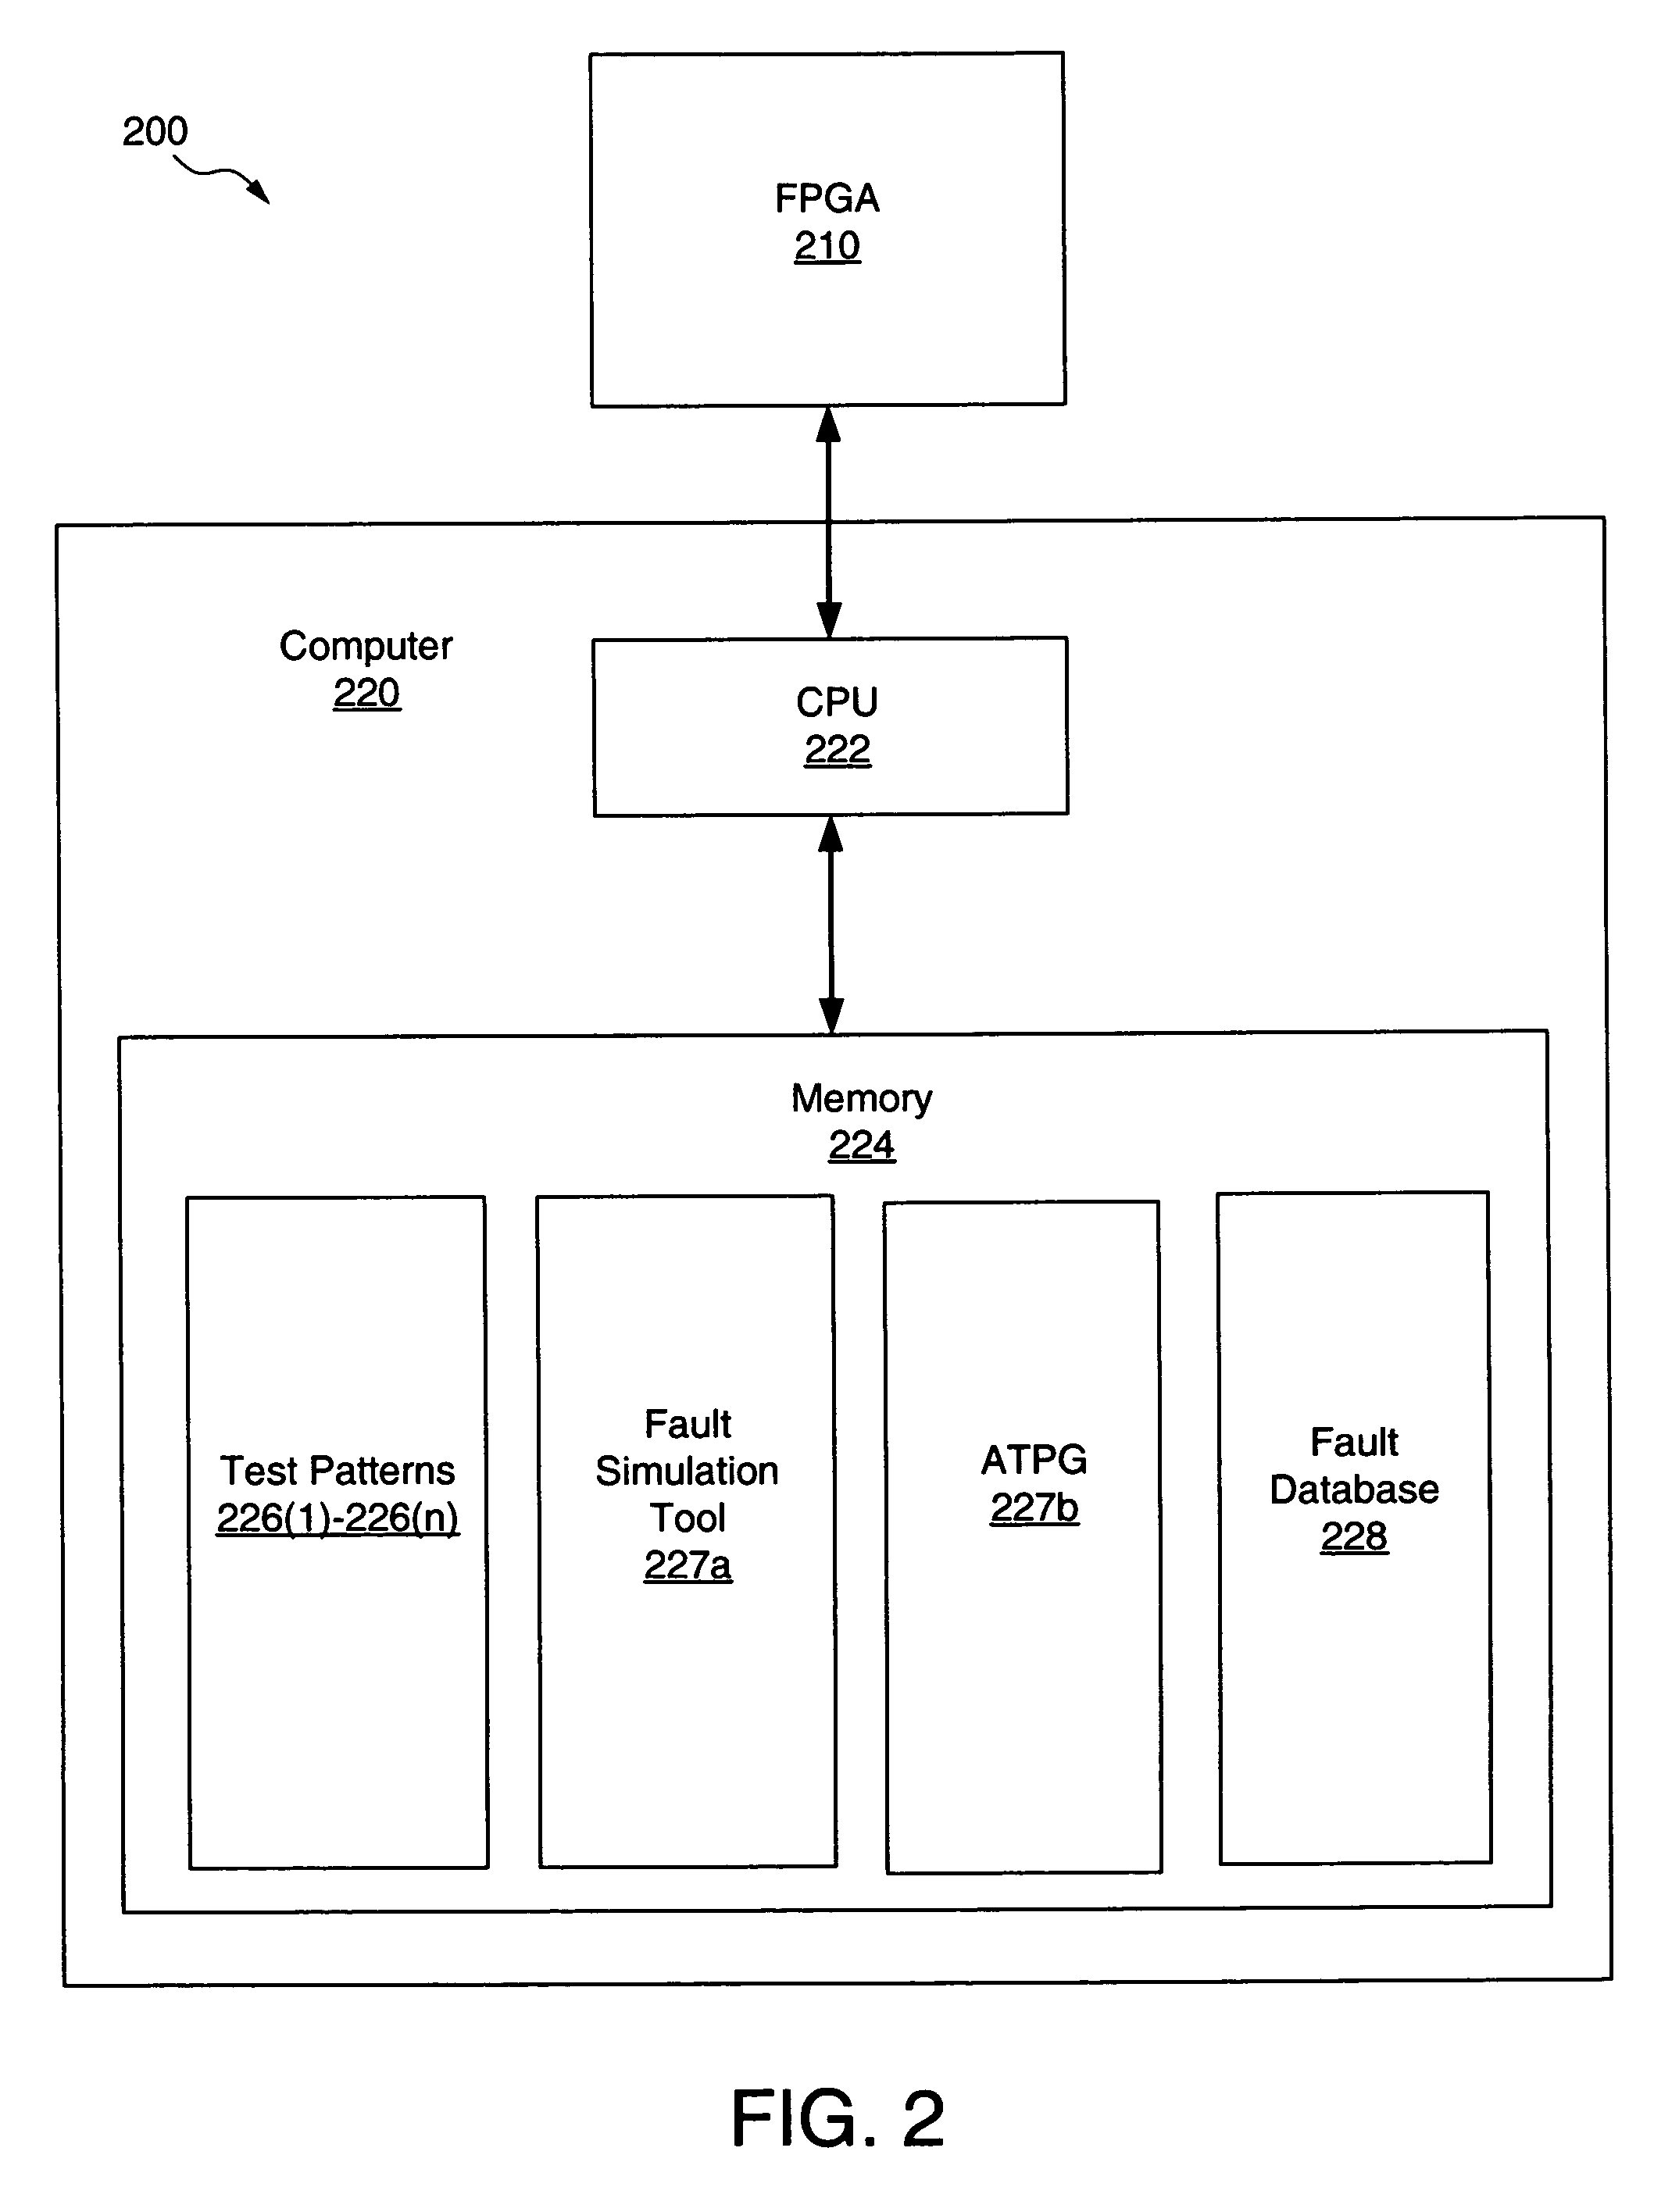 Automated fault diagnosis in a programmable device